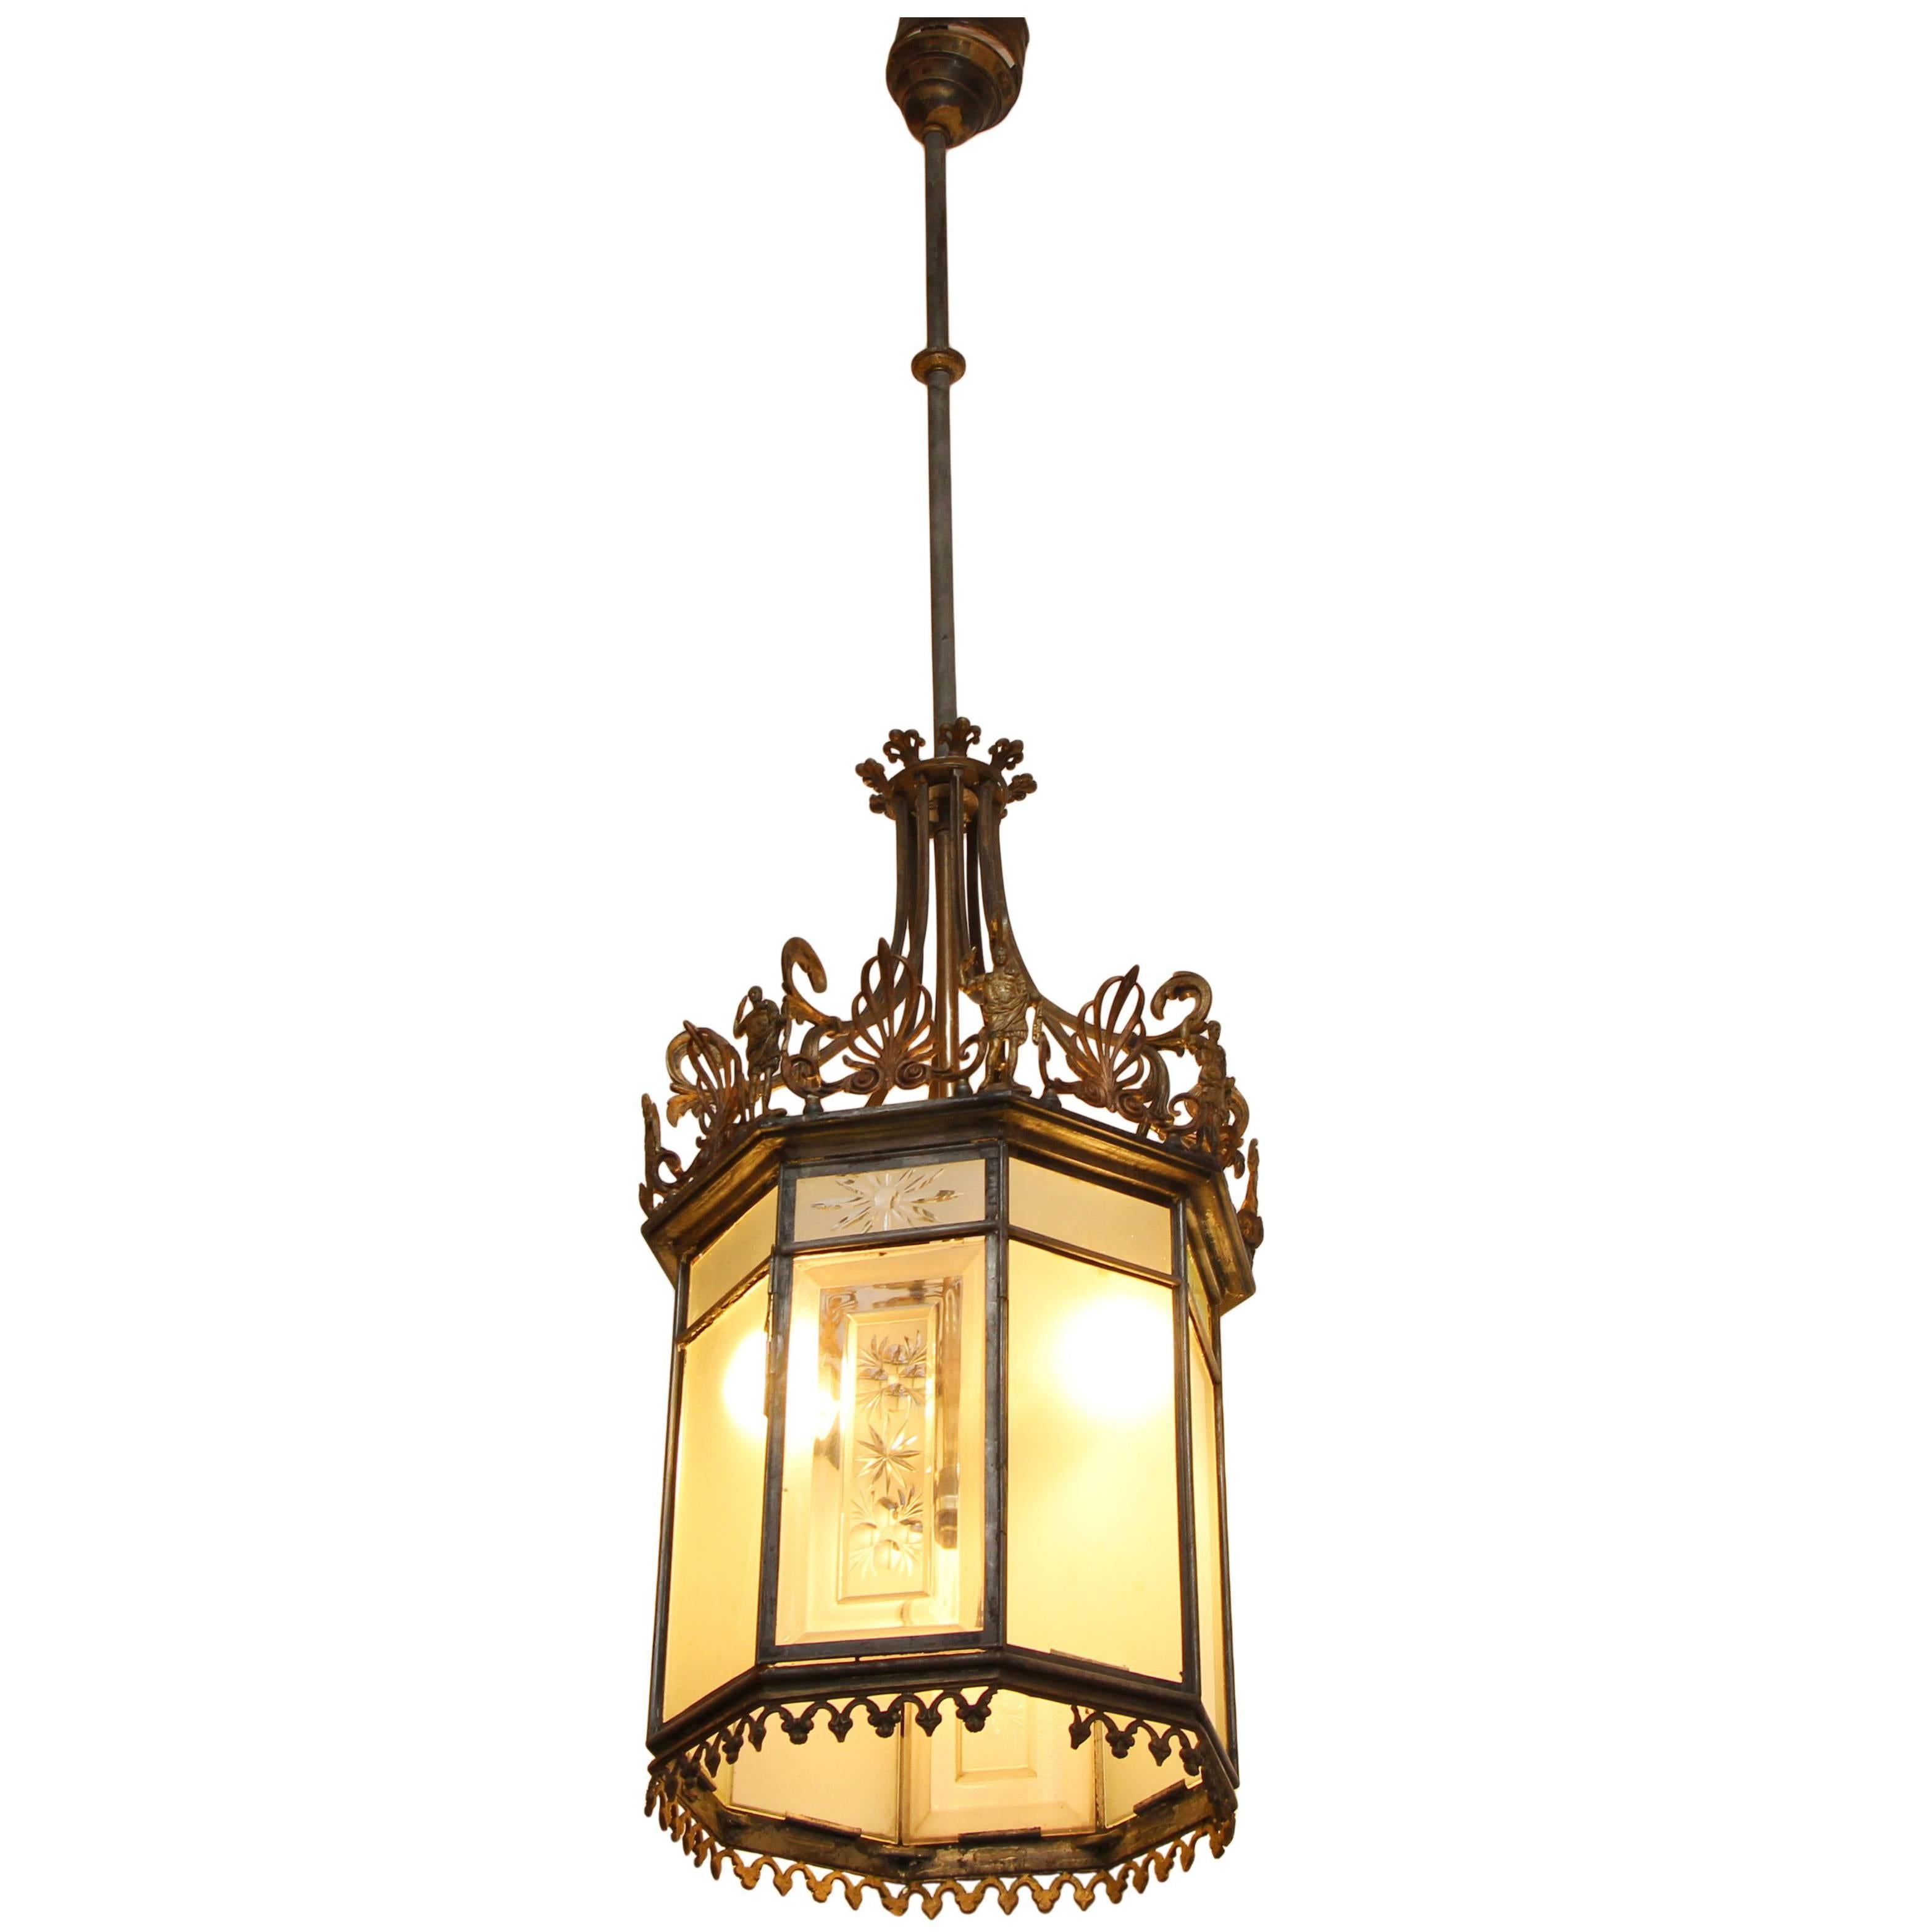 Bronze Glass 3 Light Hall Lantern from Pen and Brush Club, 1890s NYC For Sale